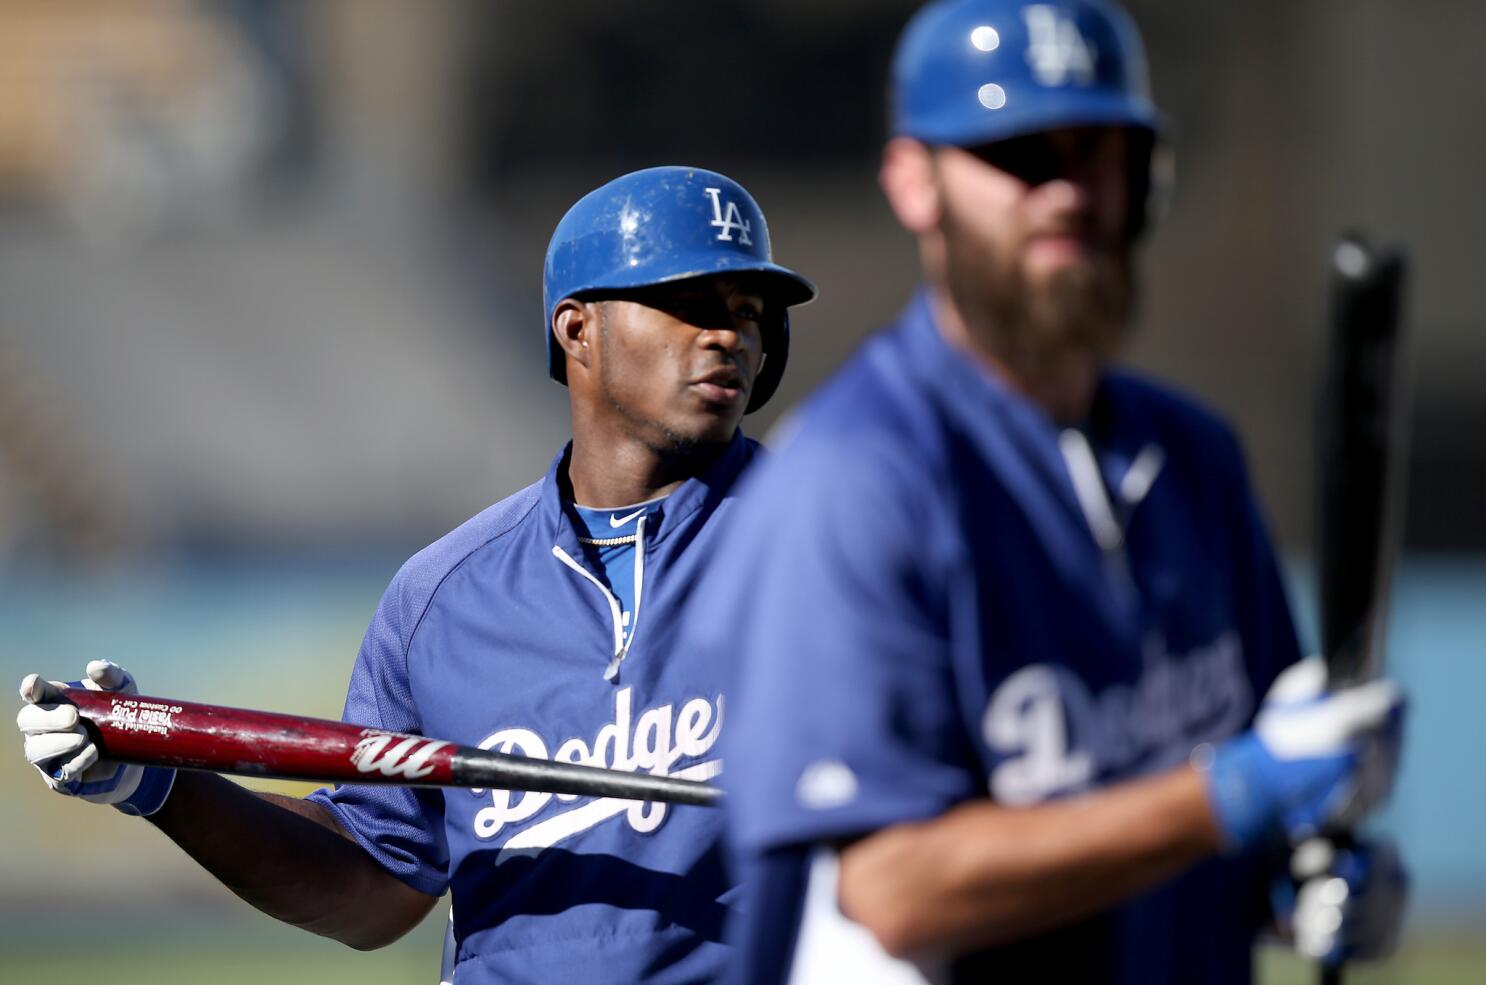 Dodgers offer Yasiel Puig a fresh start in 2016 - Los Angeles Times